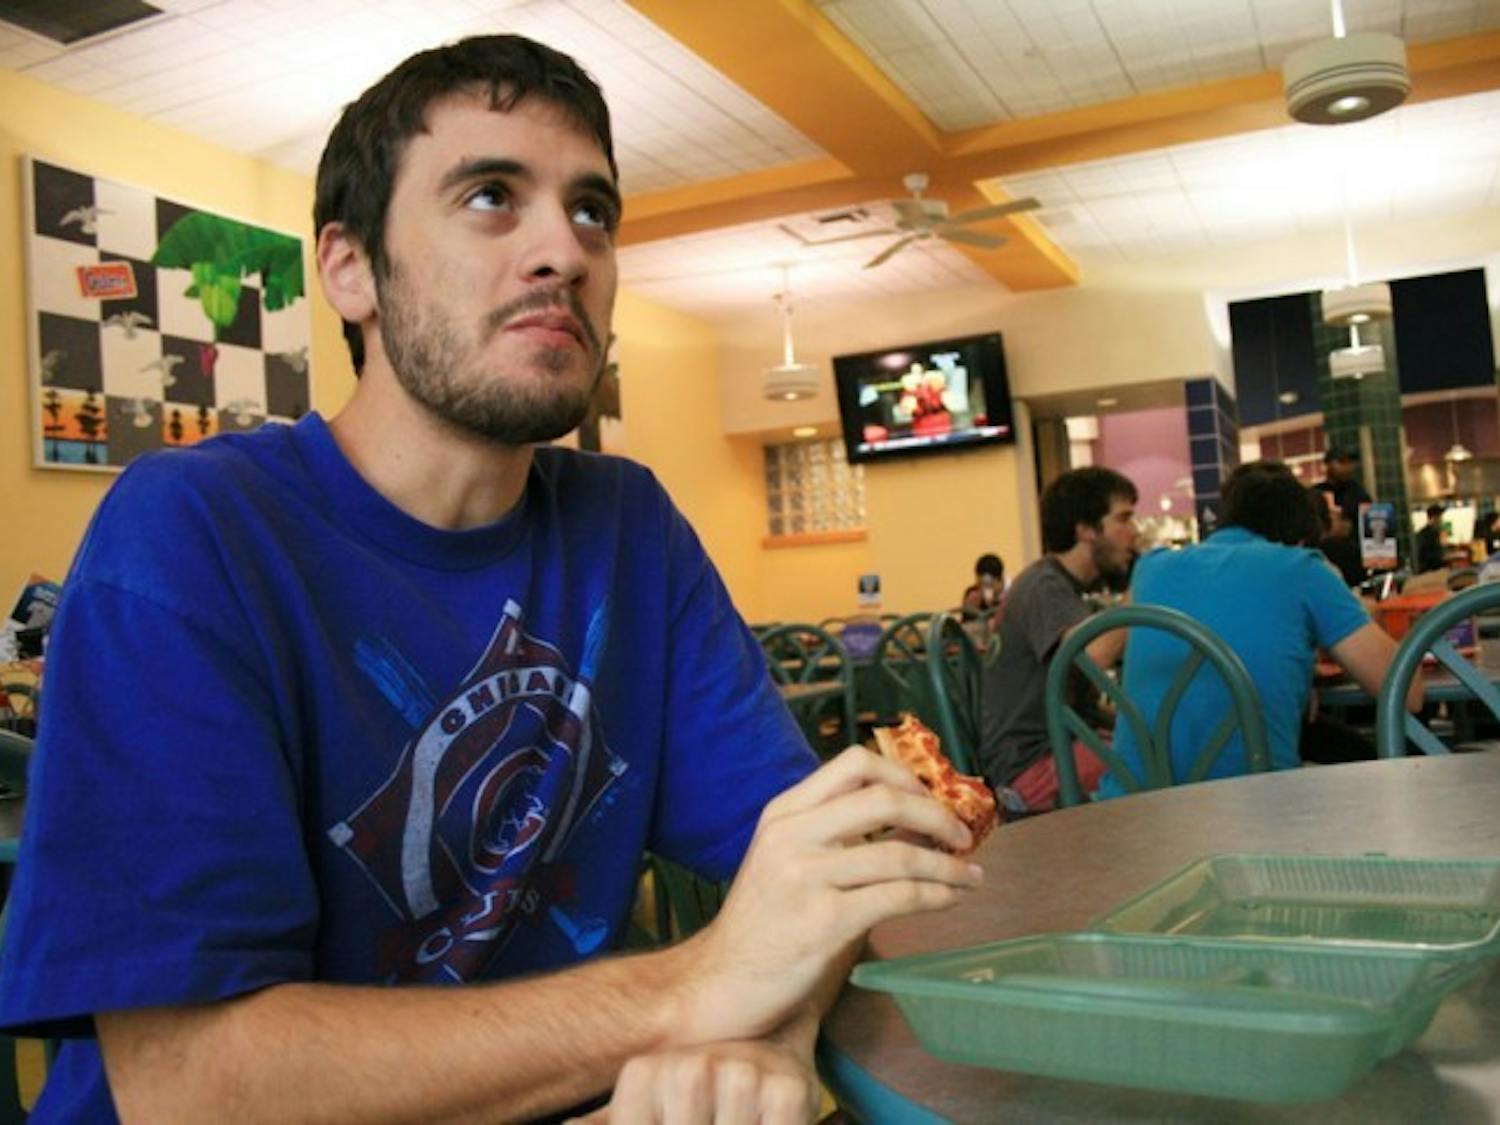 Chas Hackmann, a 19-year-old mechanical engineering sophomore, uses a green to-go box every day at Gator Dining.